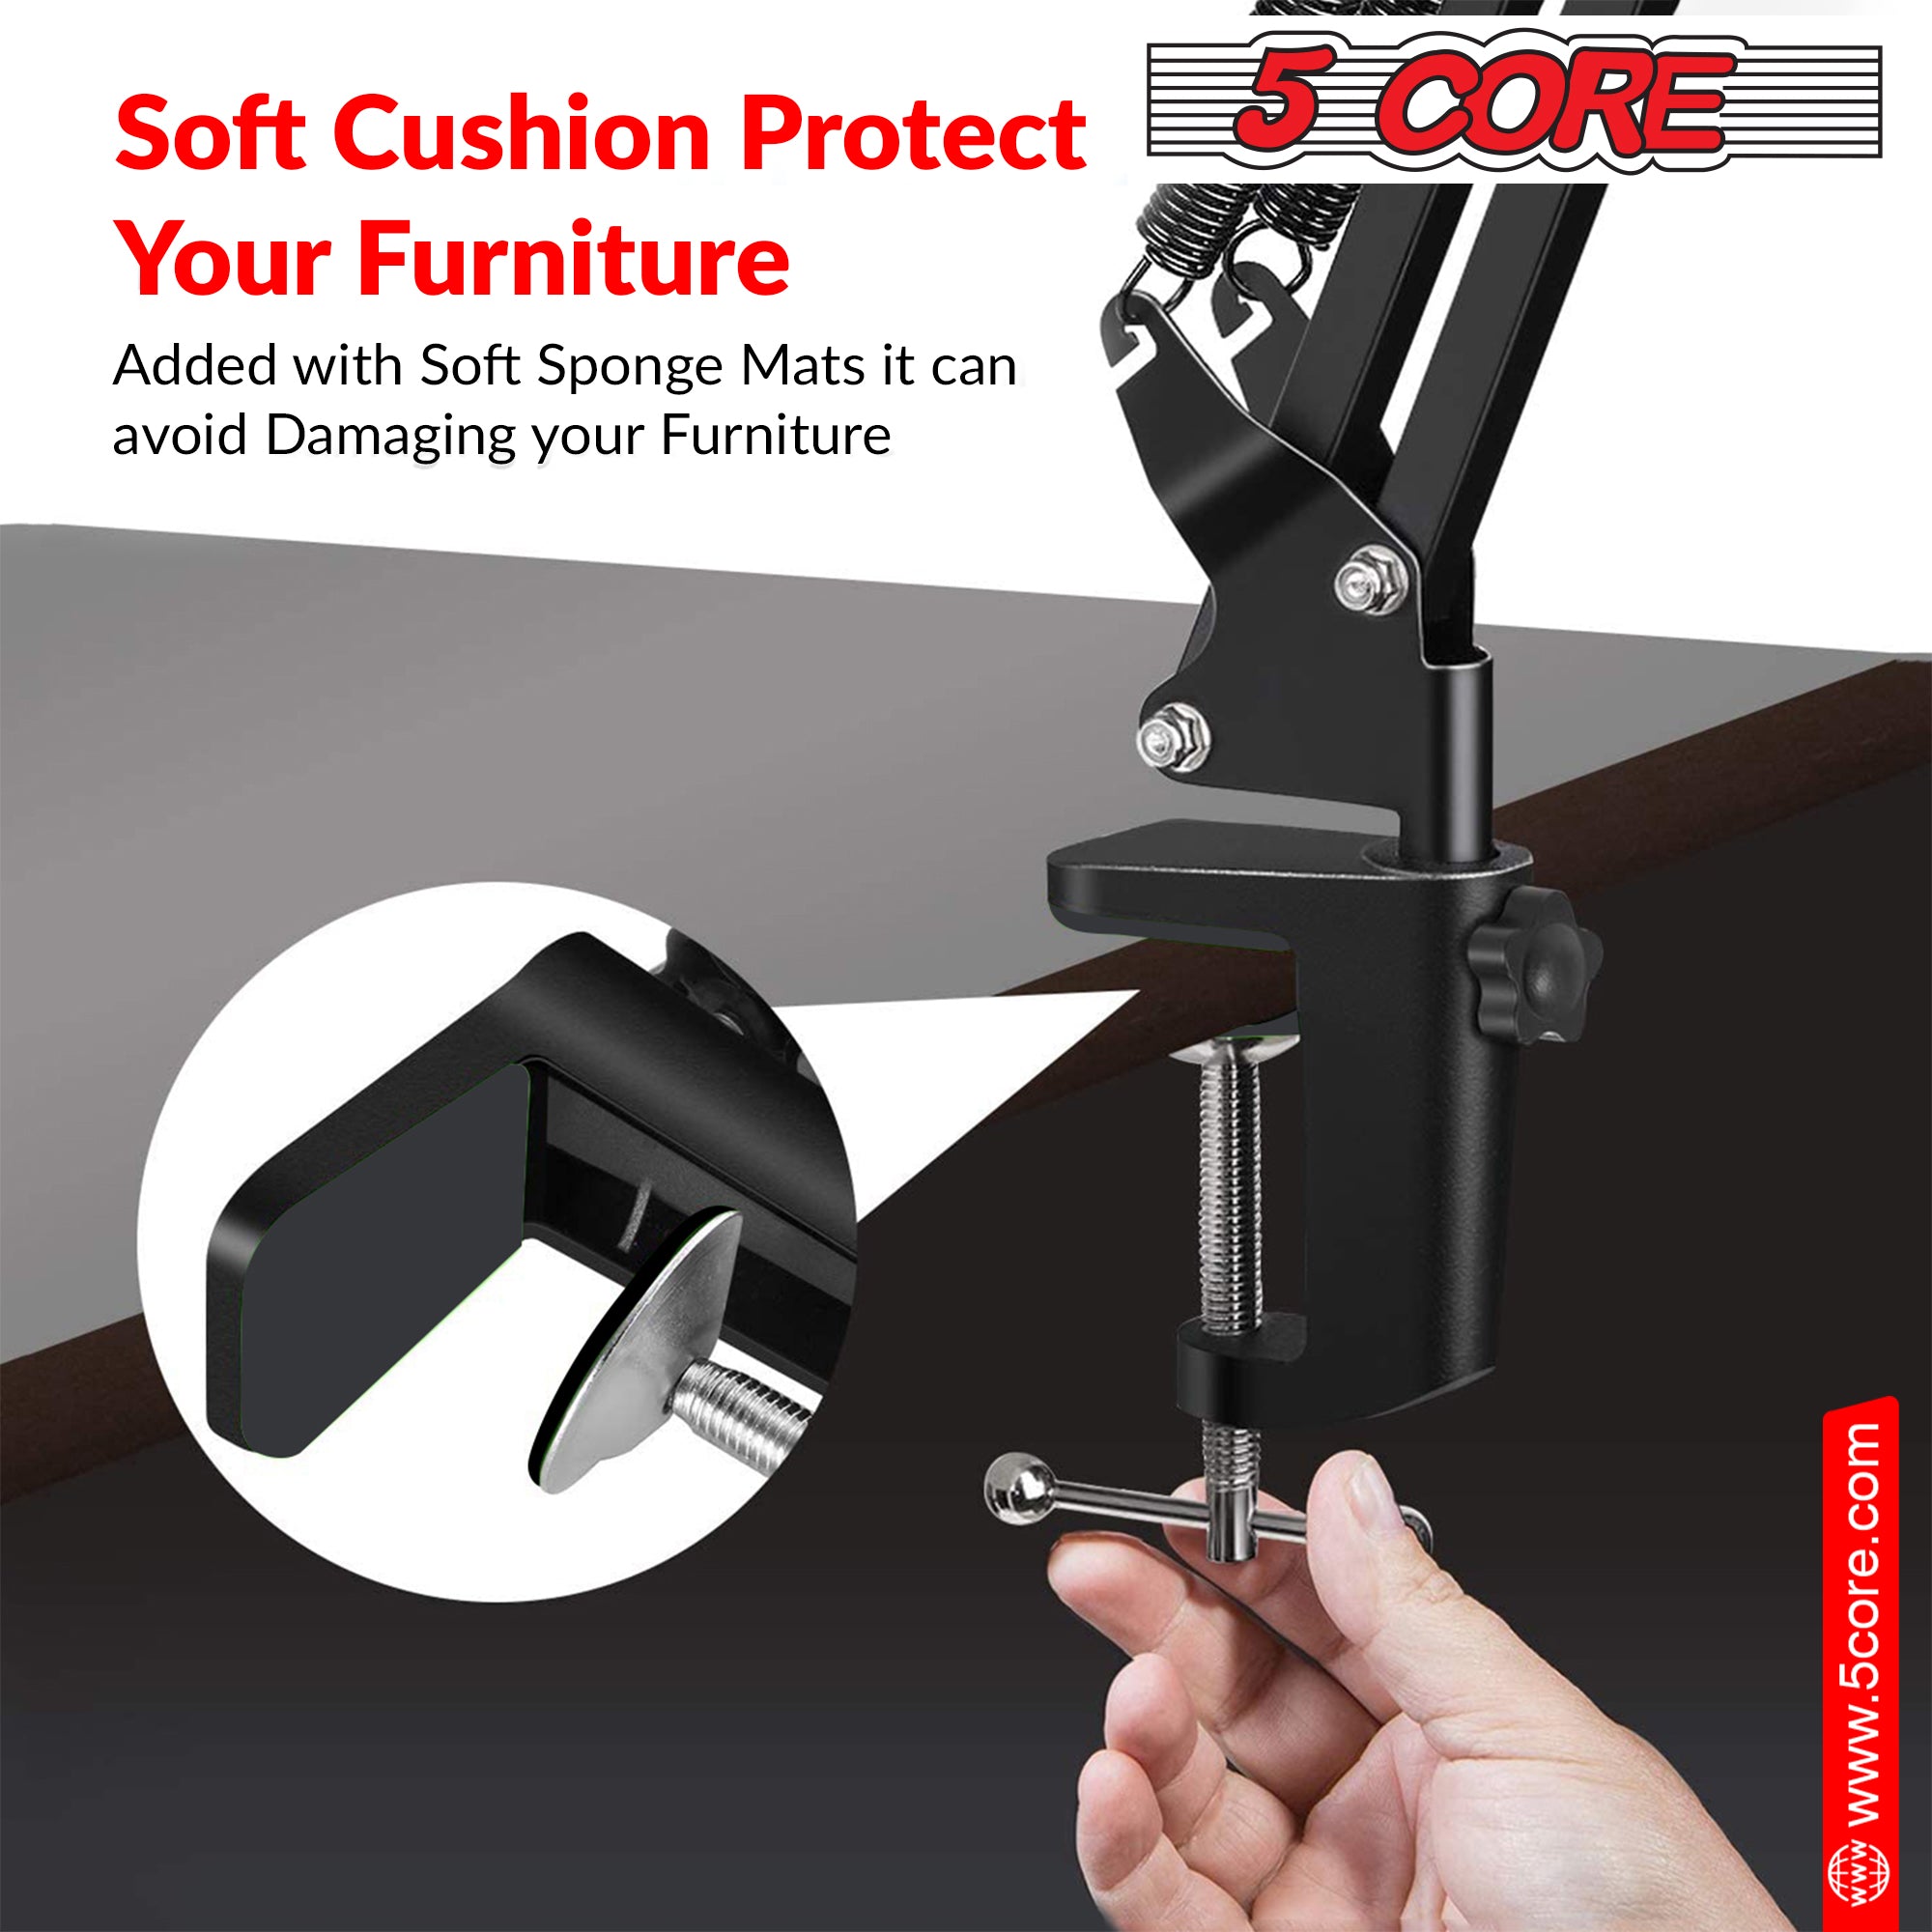 soft cushion protect your furniture